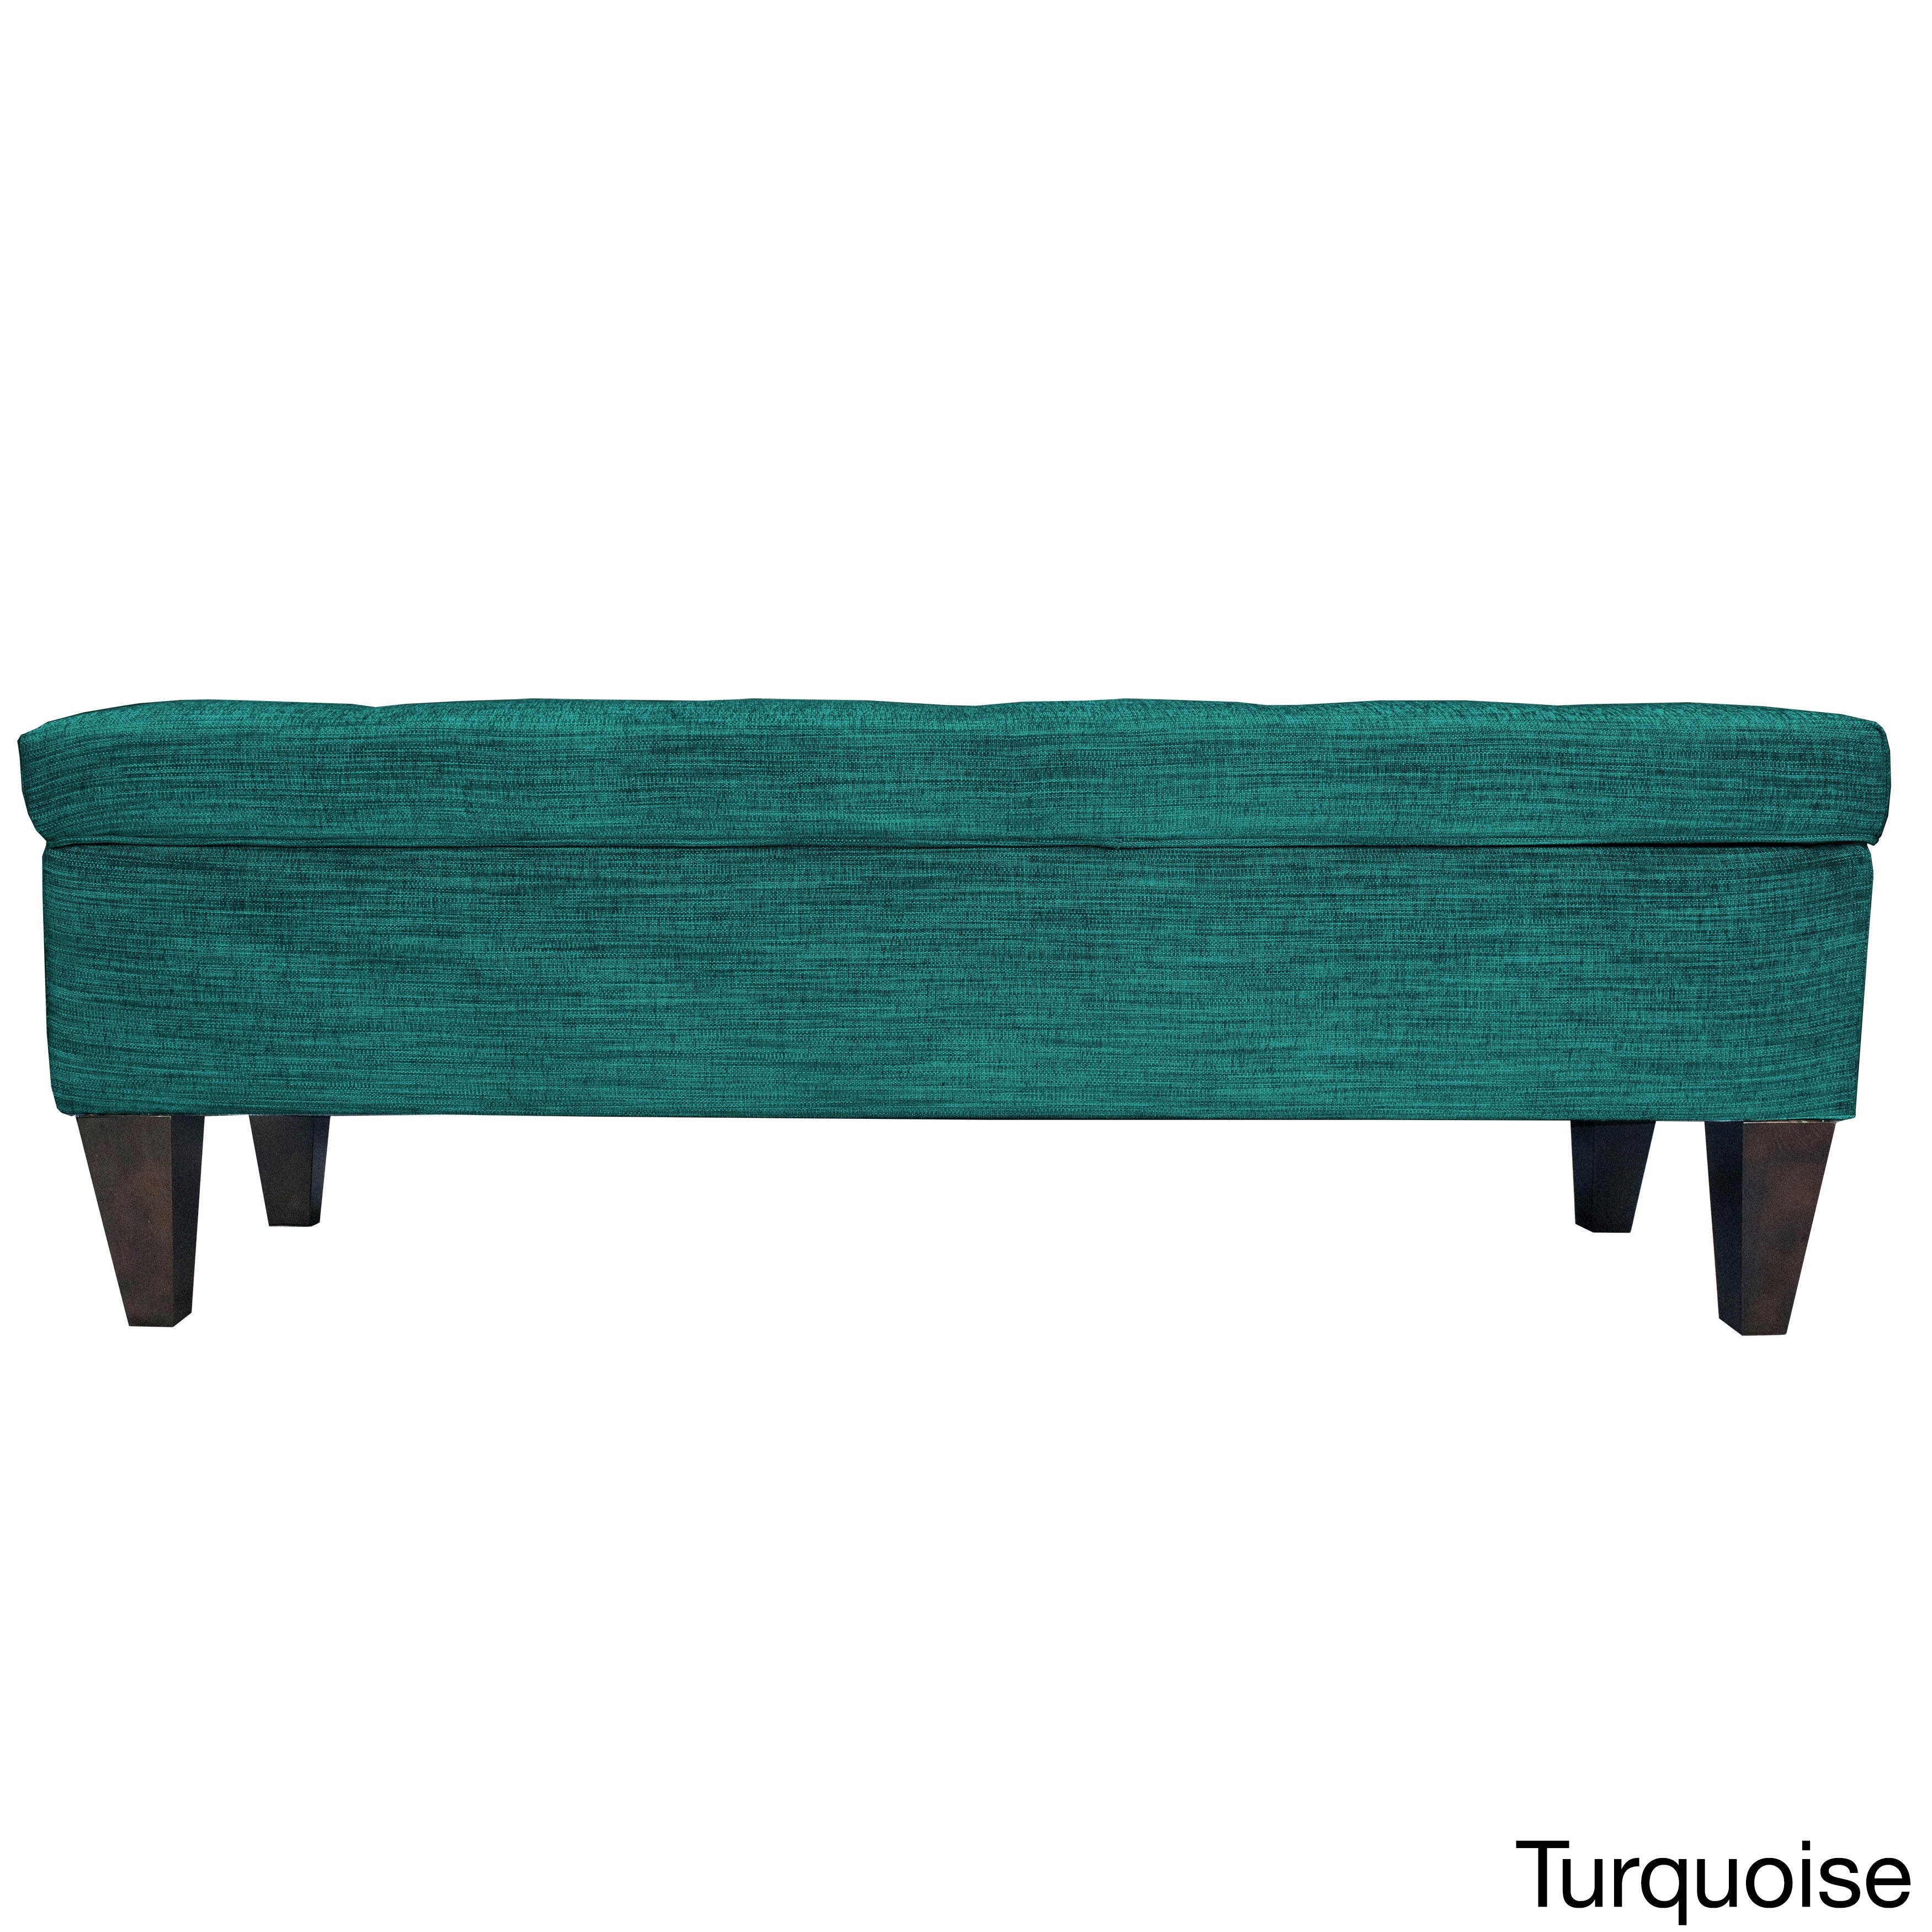 Brooke 10 Button Tufted Upholstered Long Storage Bench Ottoman Overstock 10756520